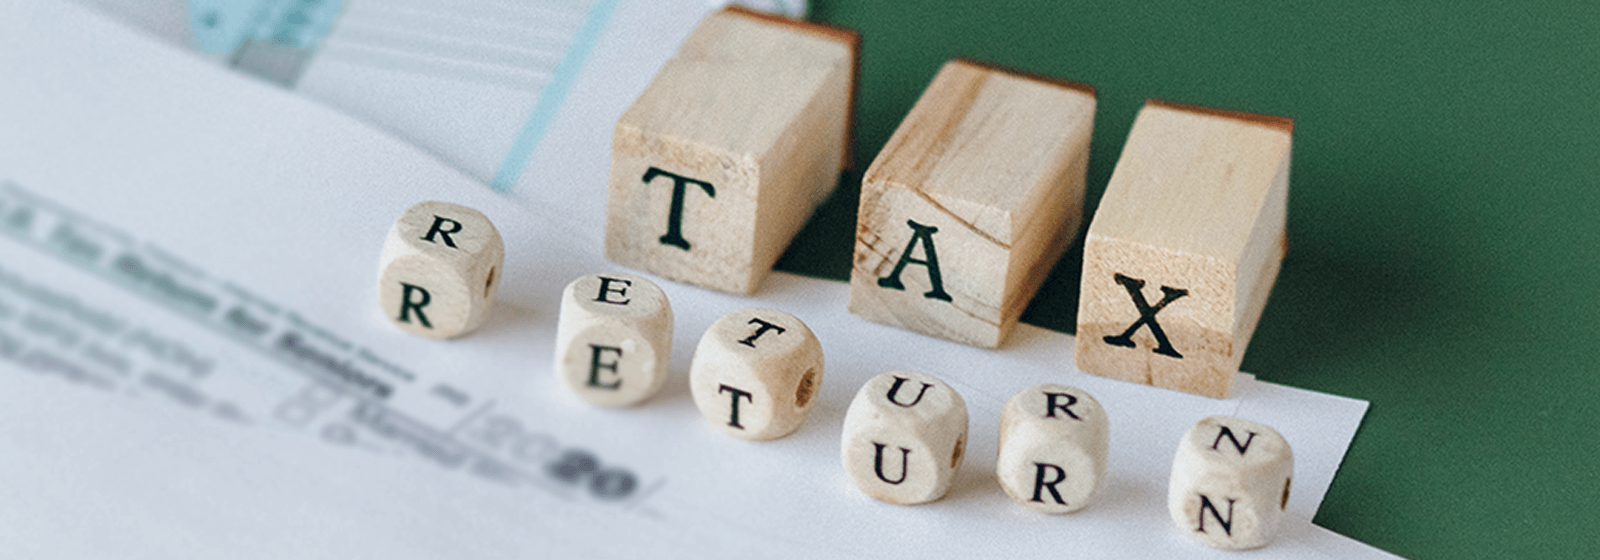 How Will Significant Changes to Capital Gains Tax Affect You and What is the Solution?